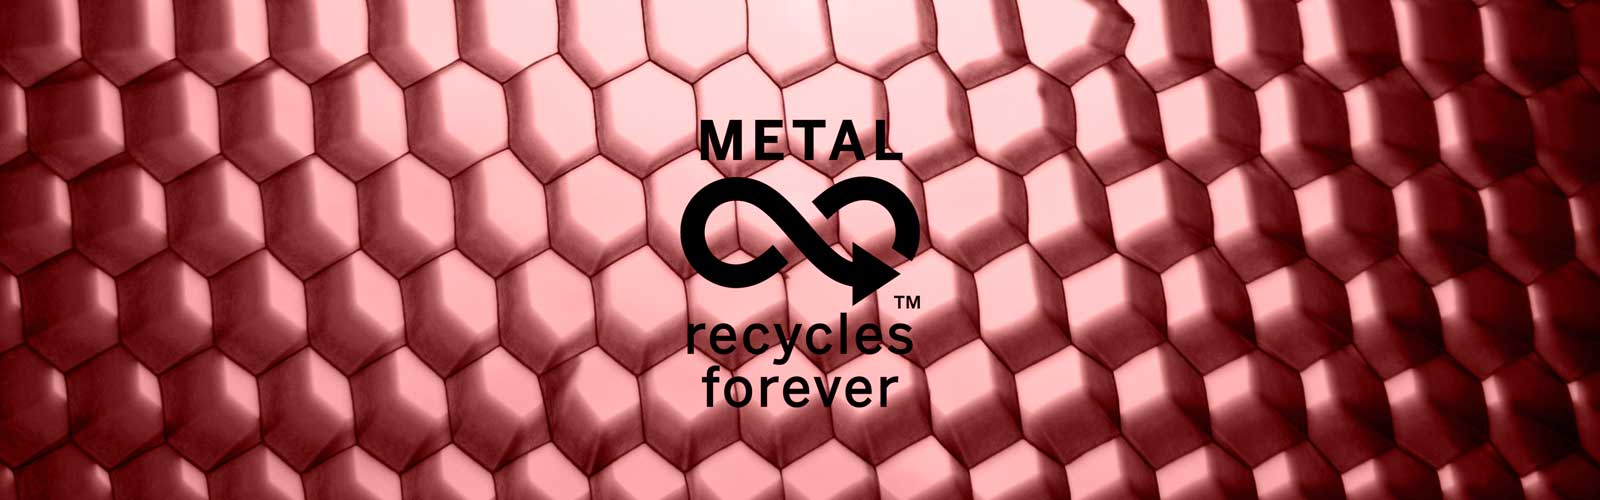 Metal Recycles Forever Logo on Red